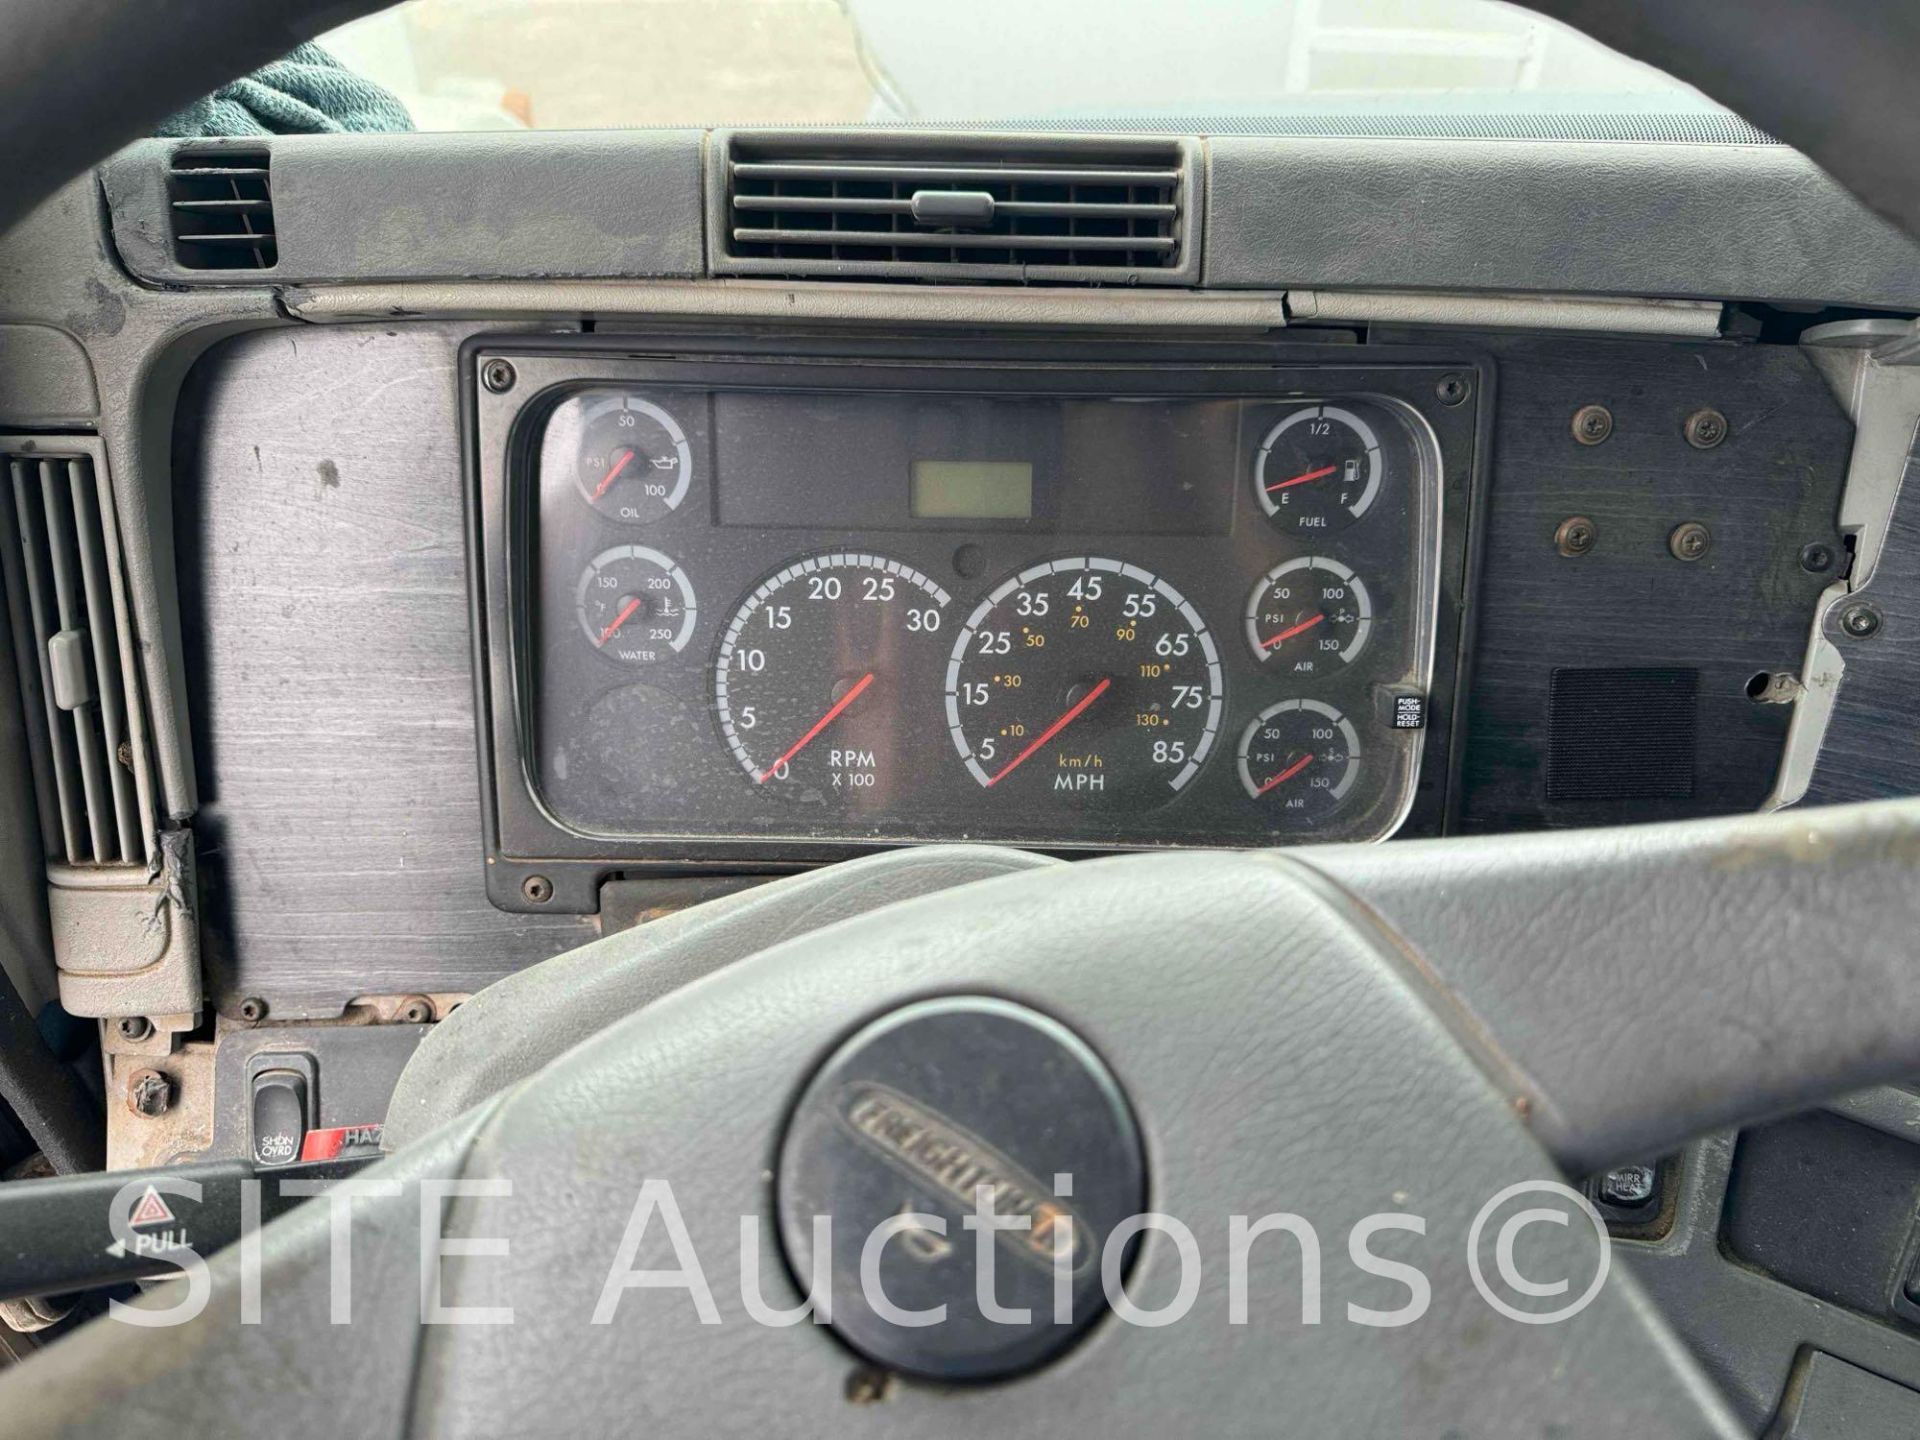 2004 Freightliner Columbia T/A Fuel Truck - Image 84 of 85